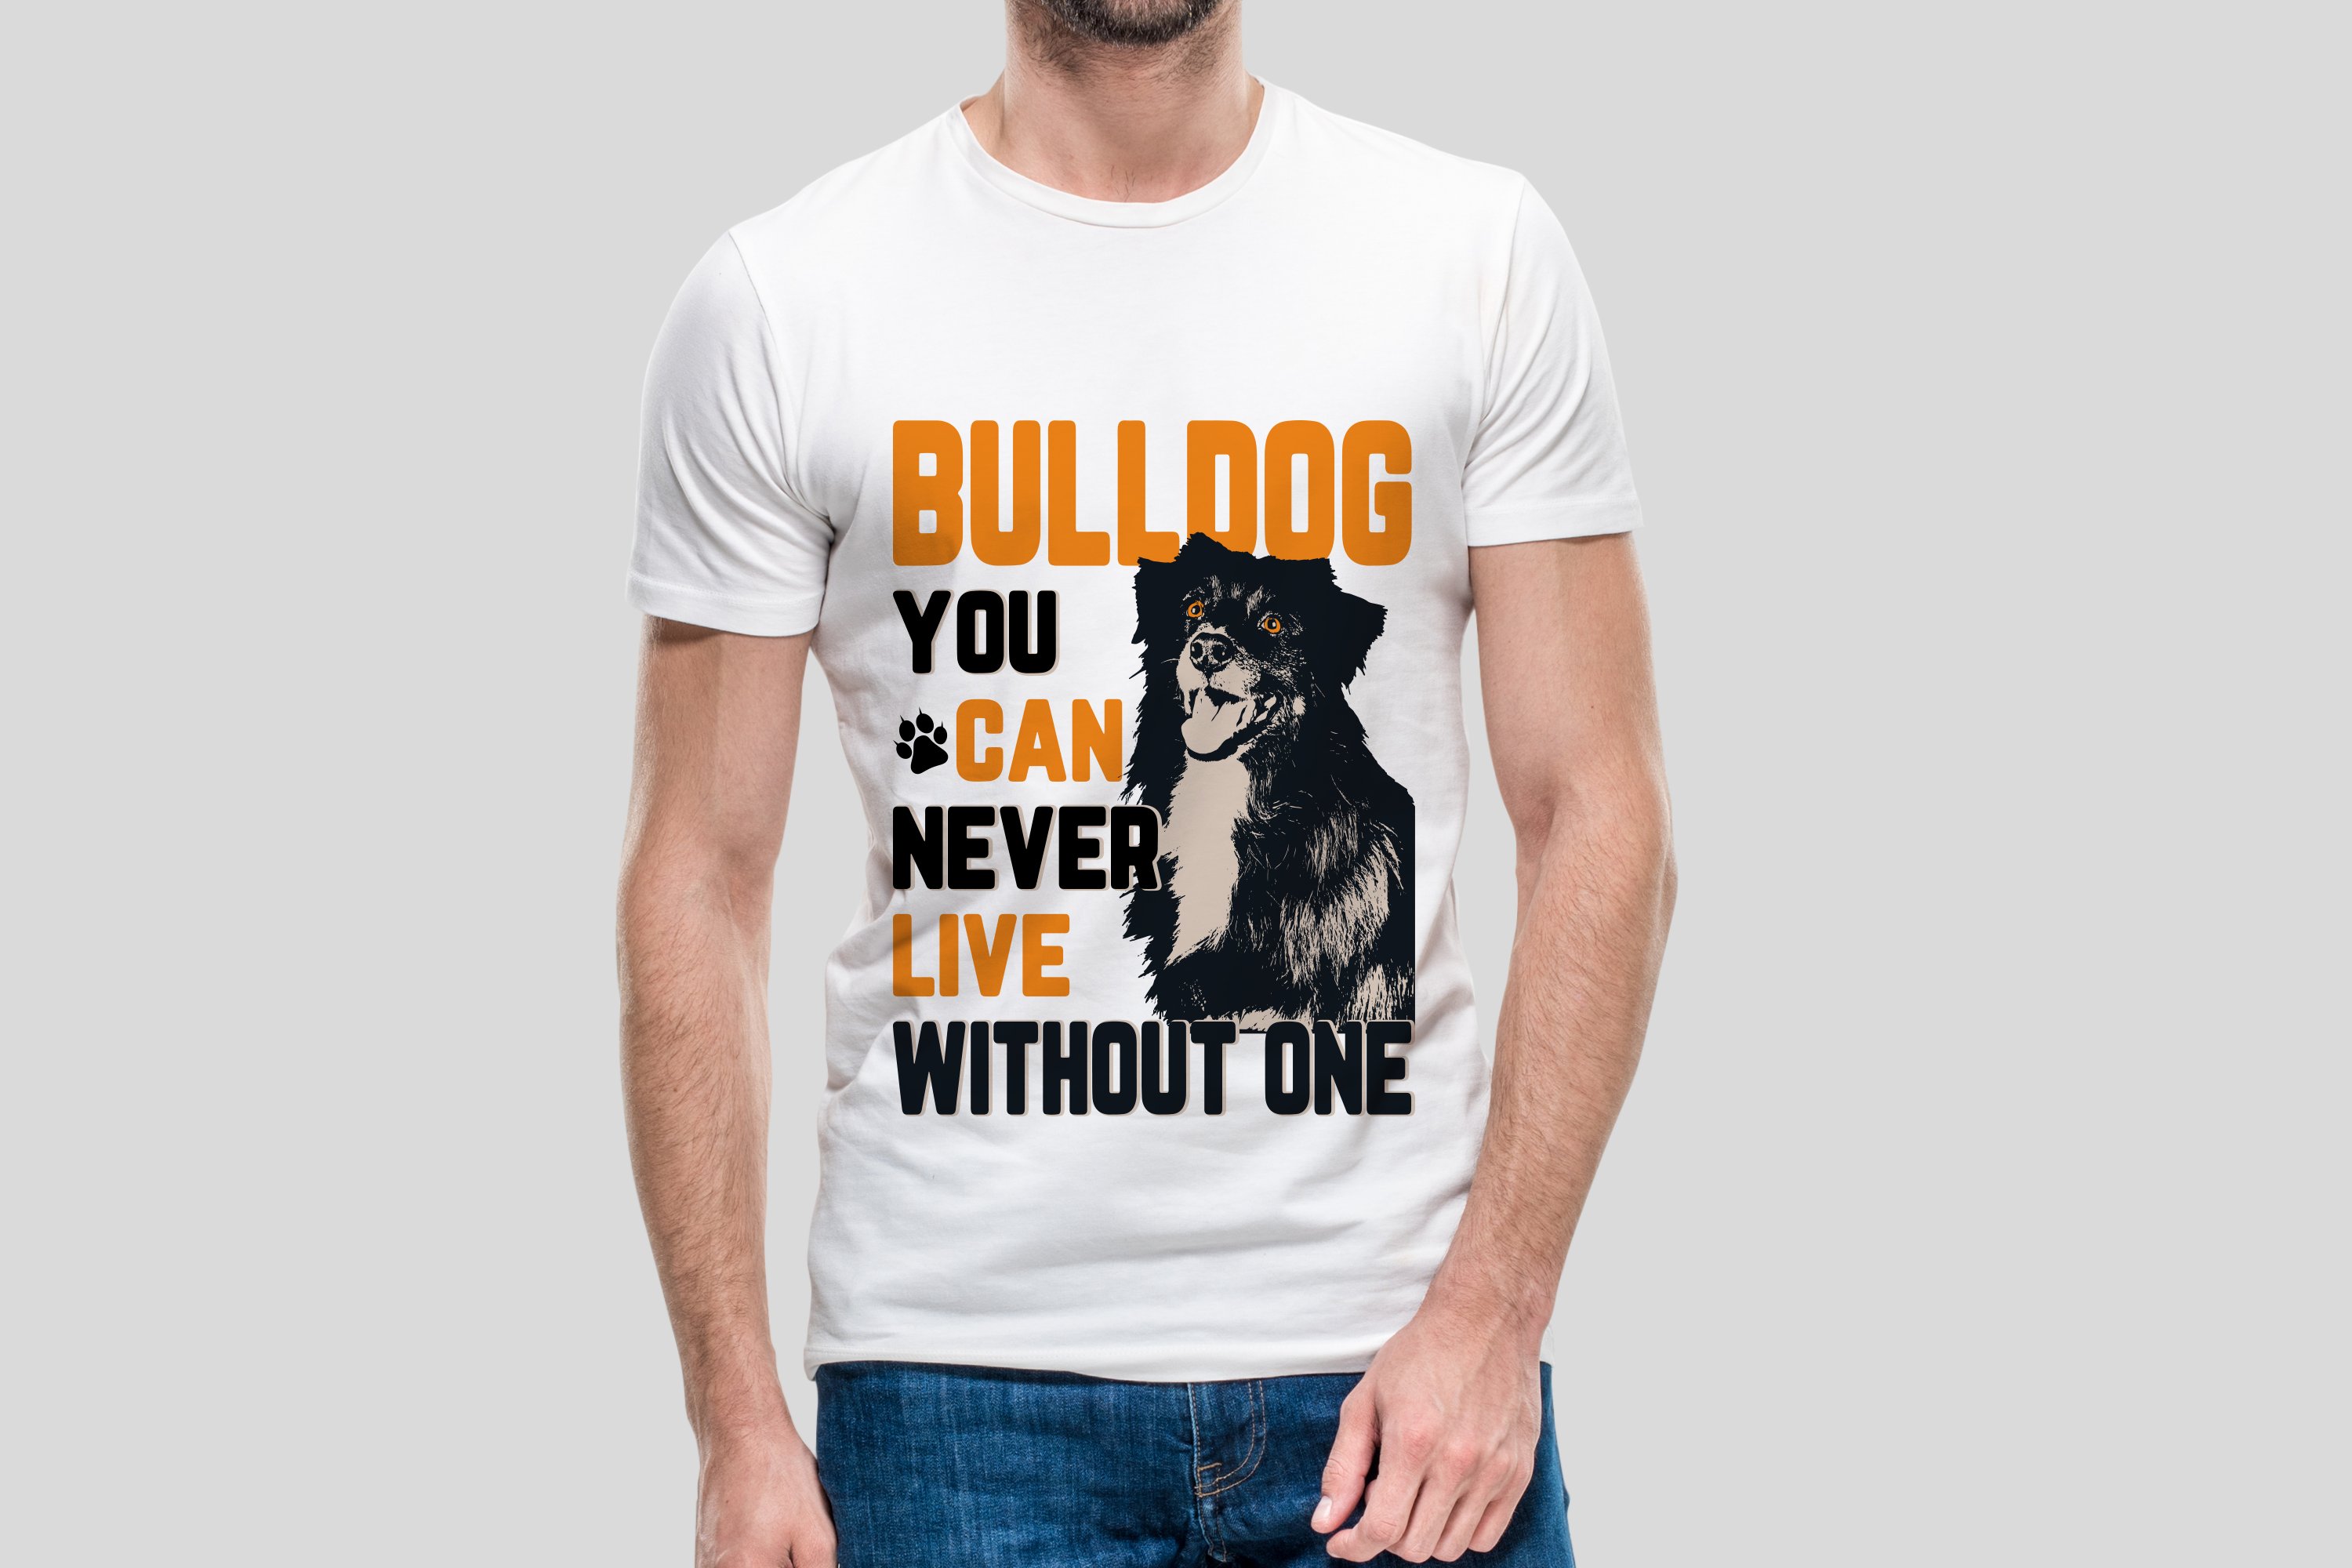 White t-shirt with orange font and happy dog.